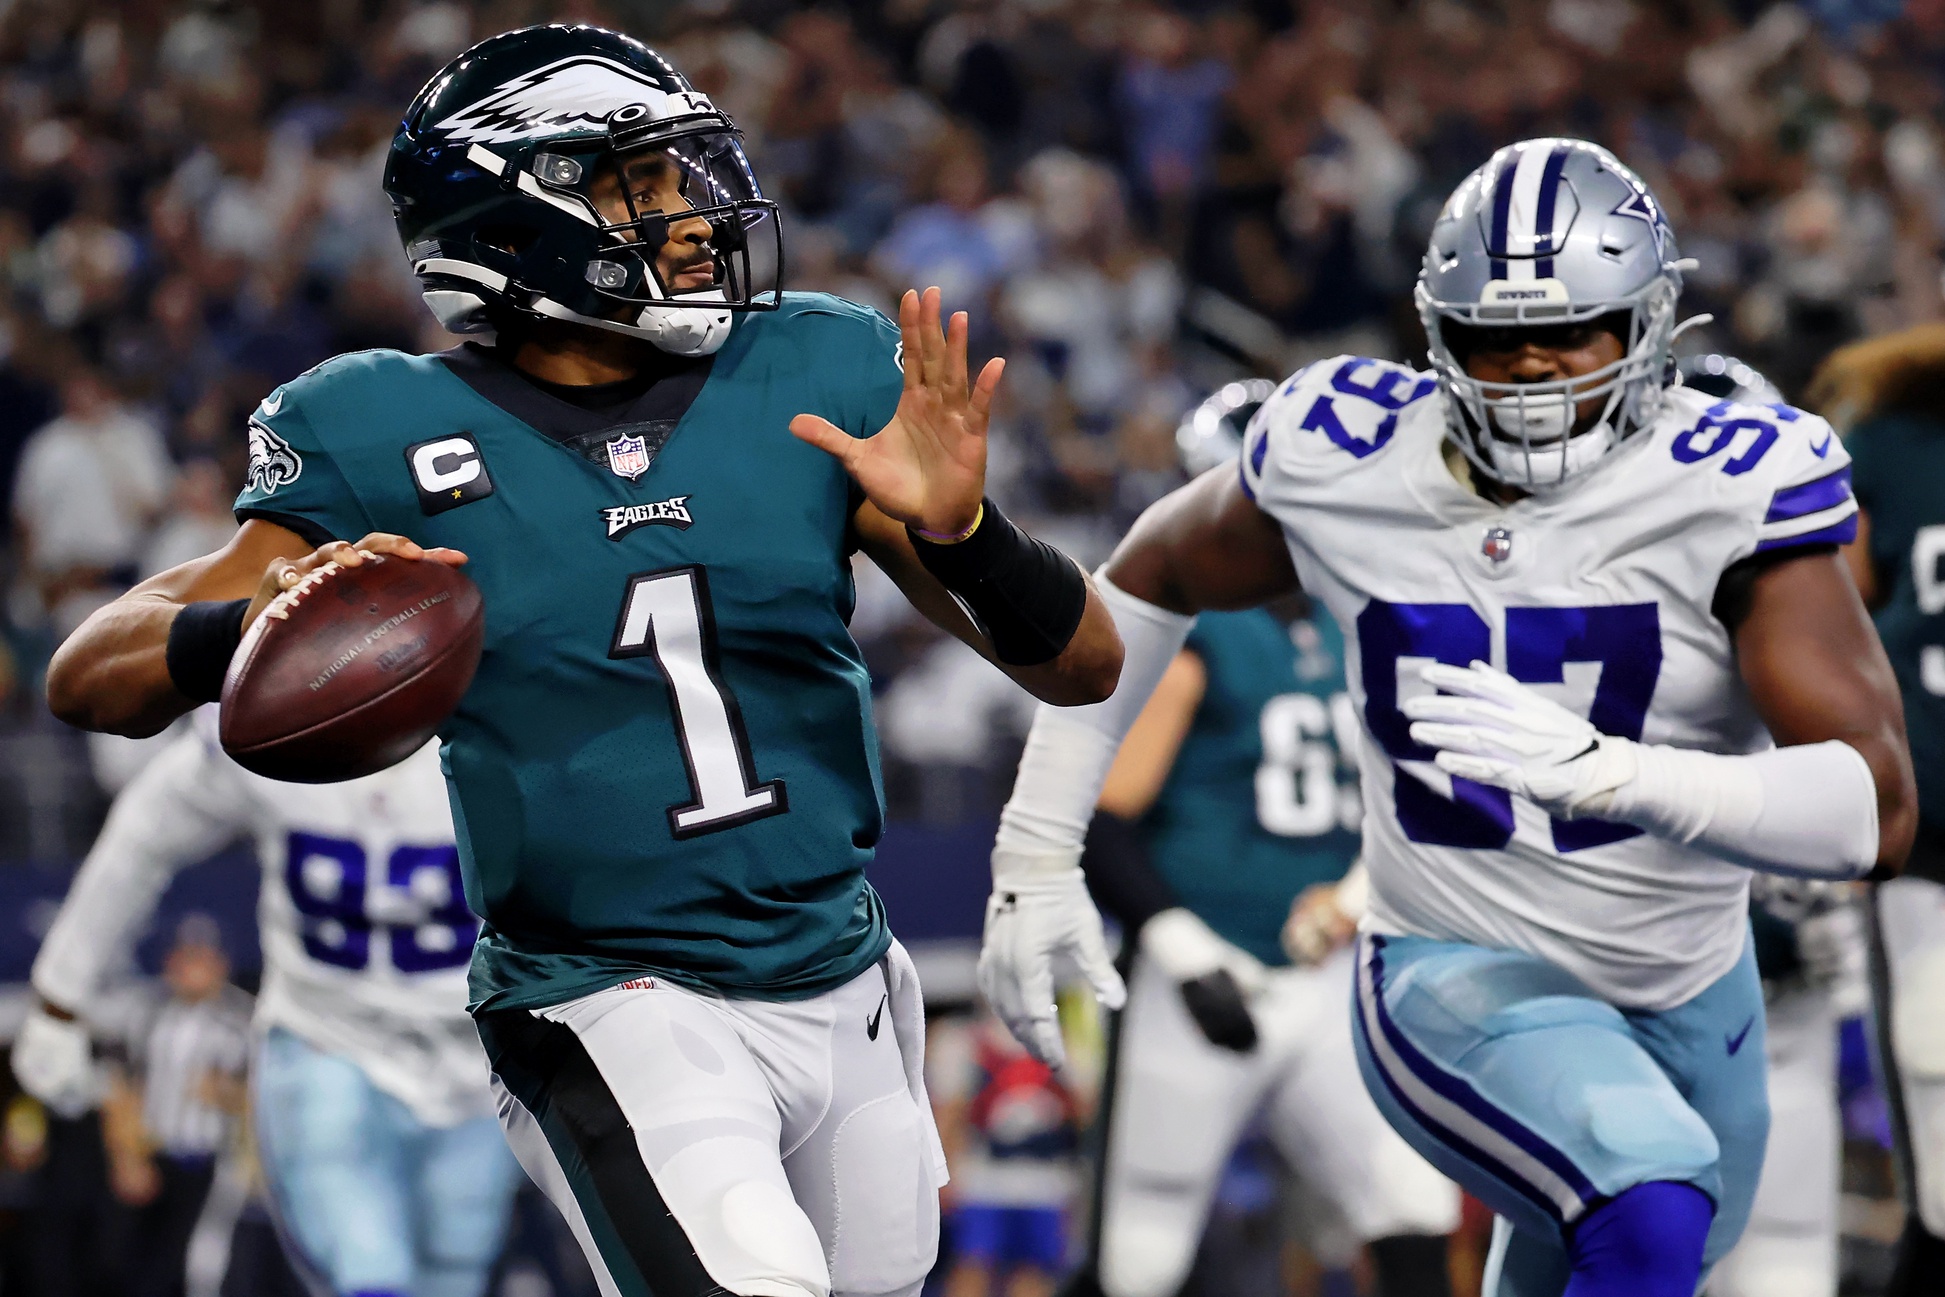 Jalen Hurts struggled most of Monday night against the Cowboys defense